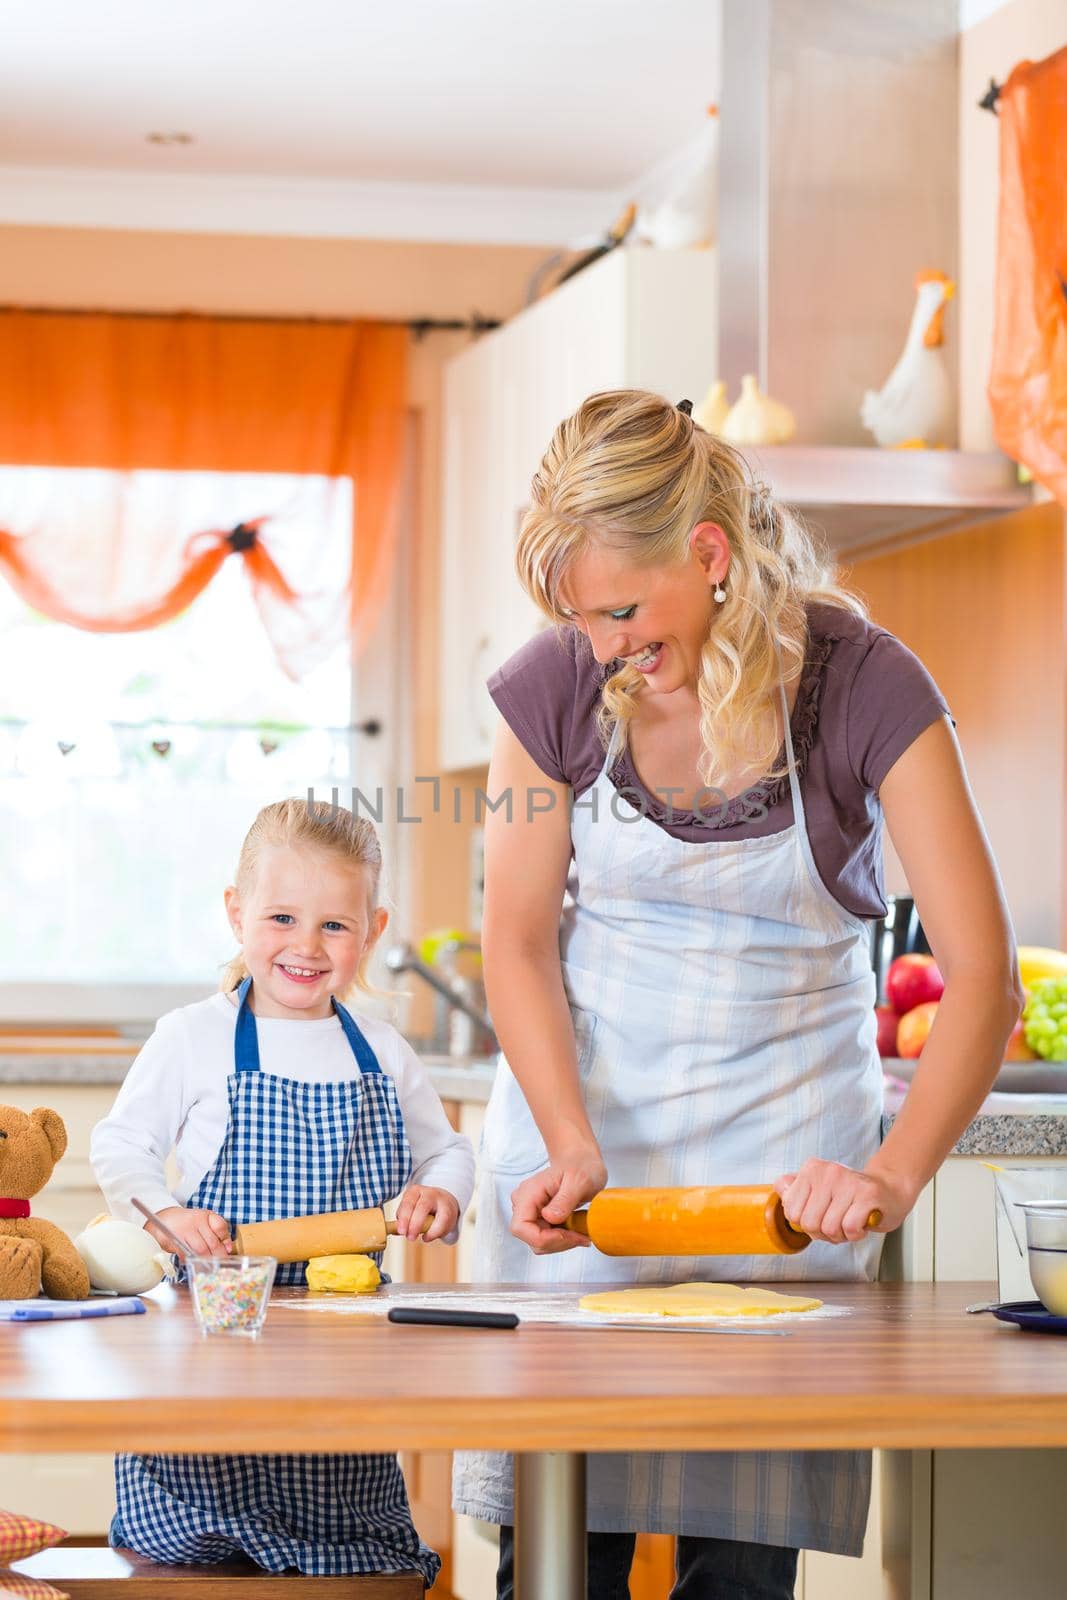 Mother and daughter baking cookies together by Kzenon